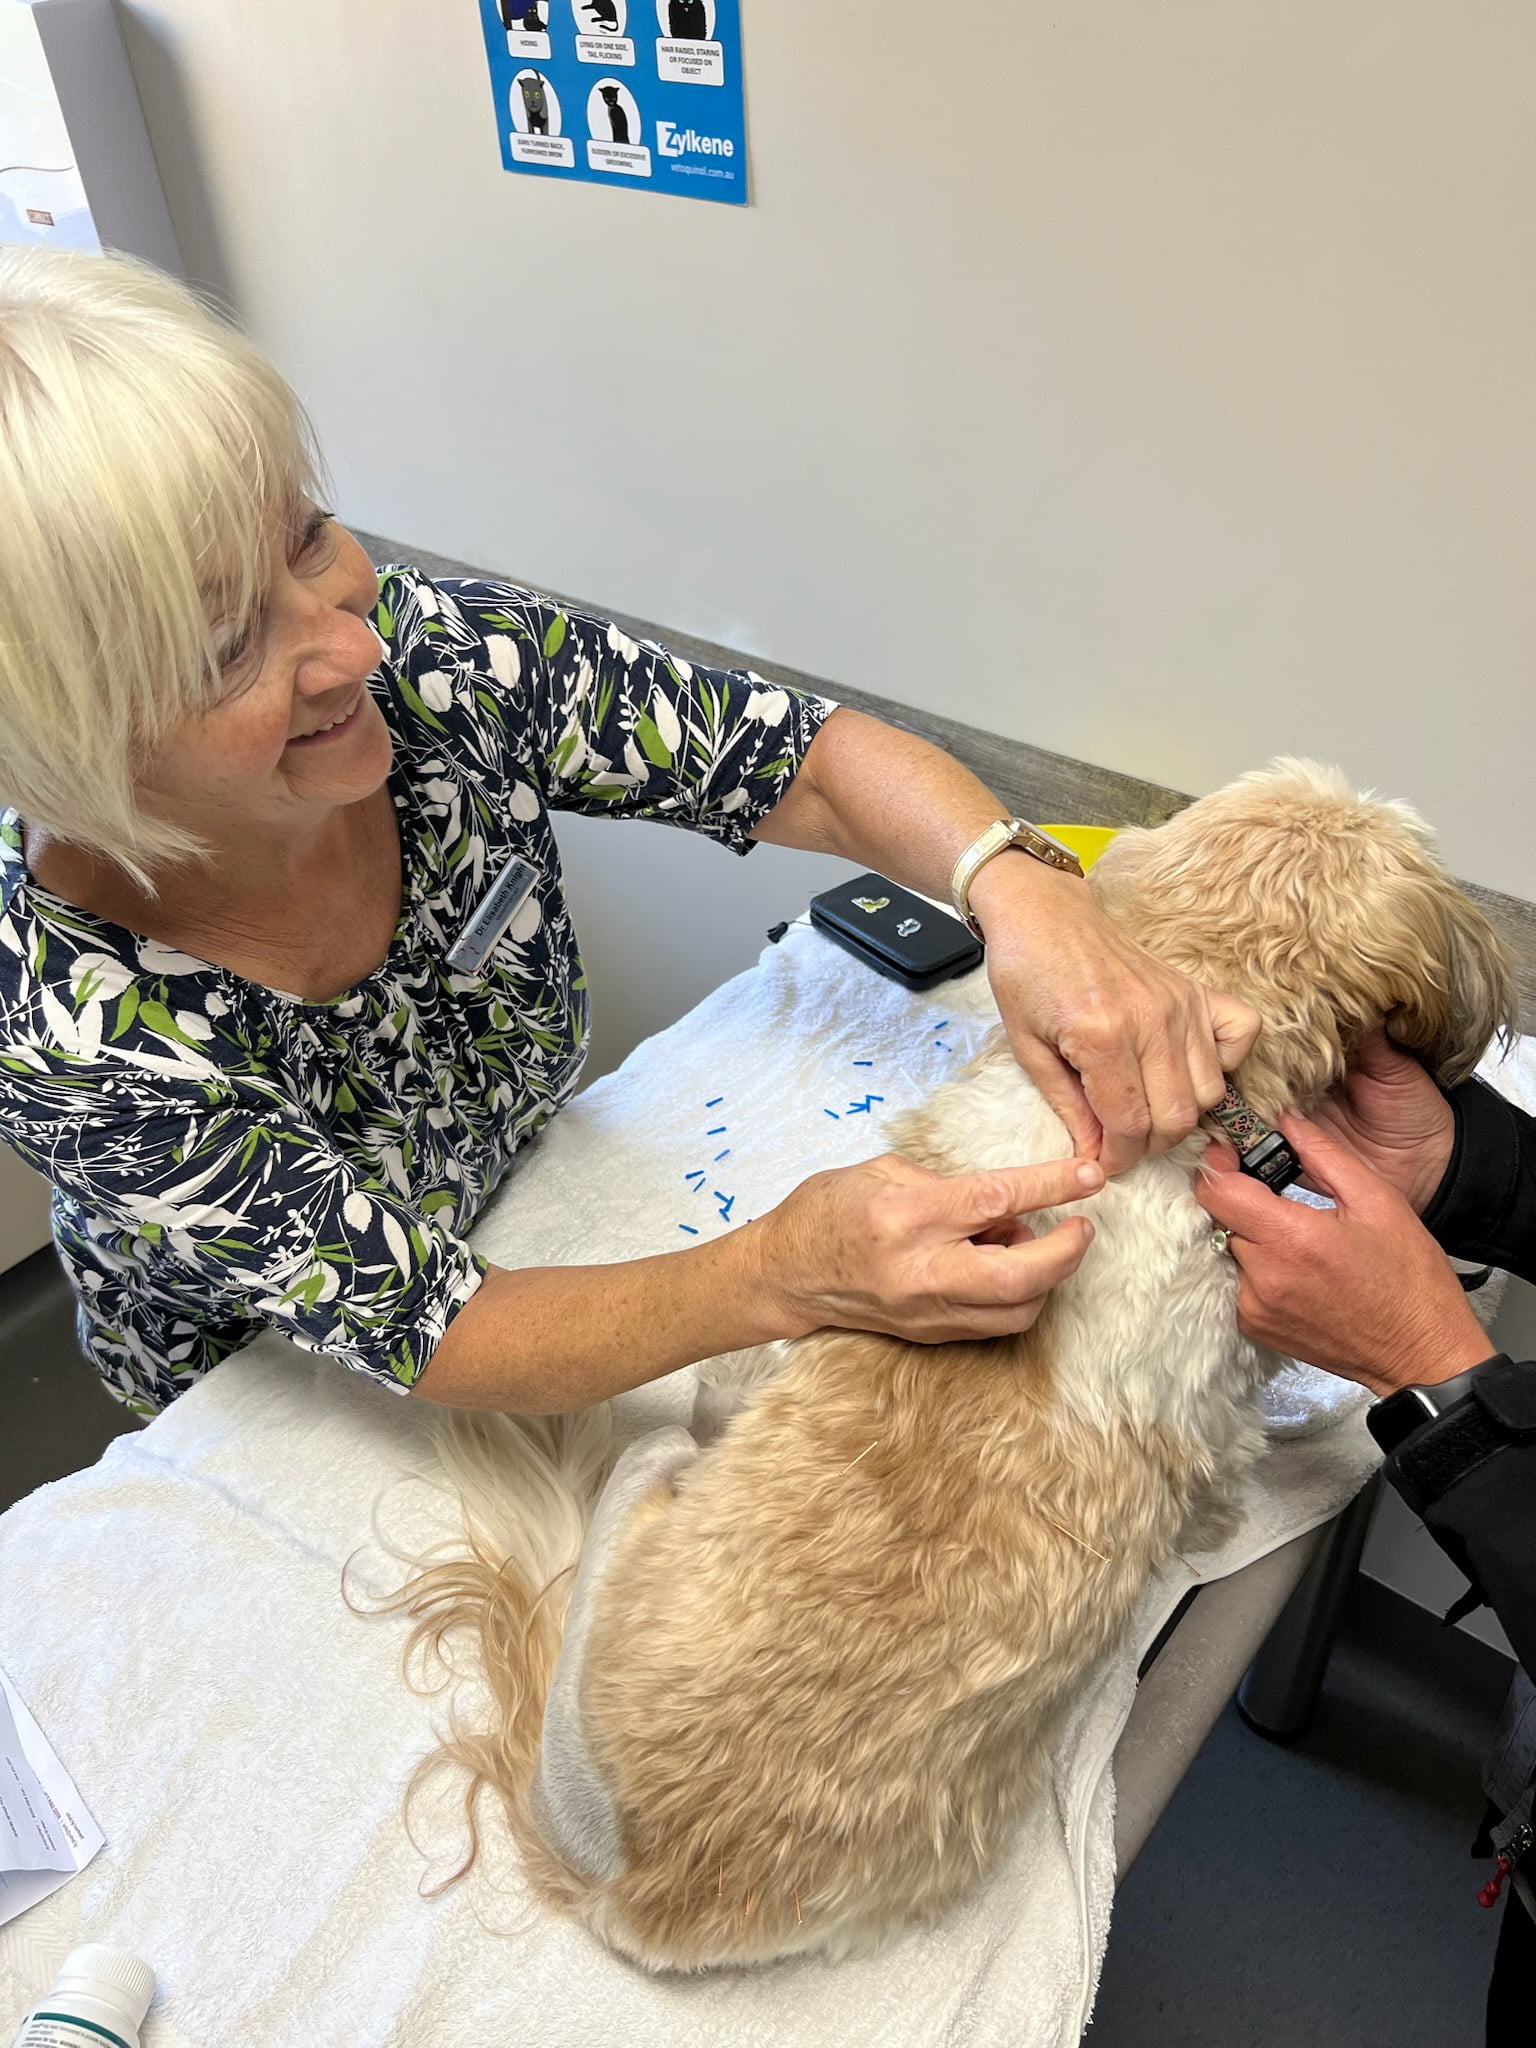 Acupuncture in animals helps with tissue repair